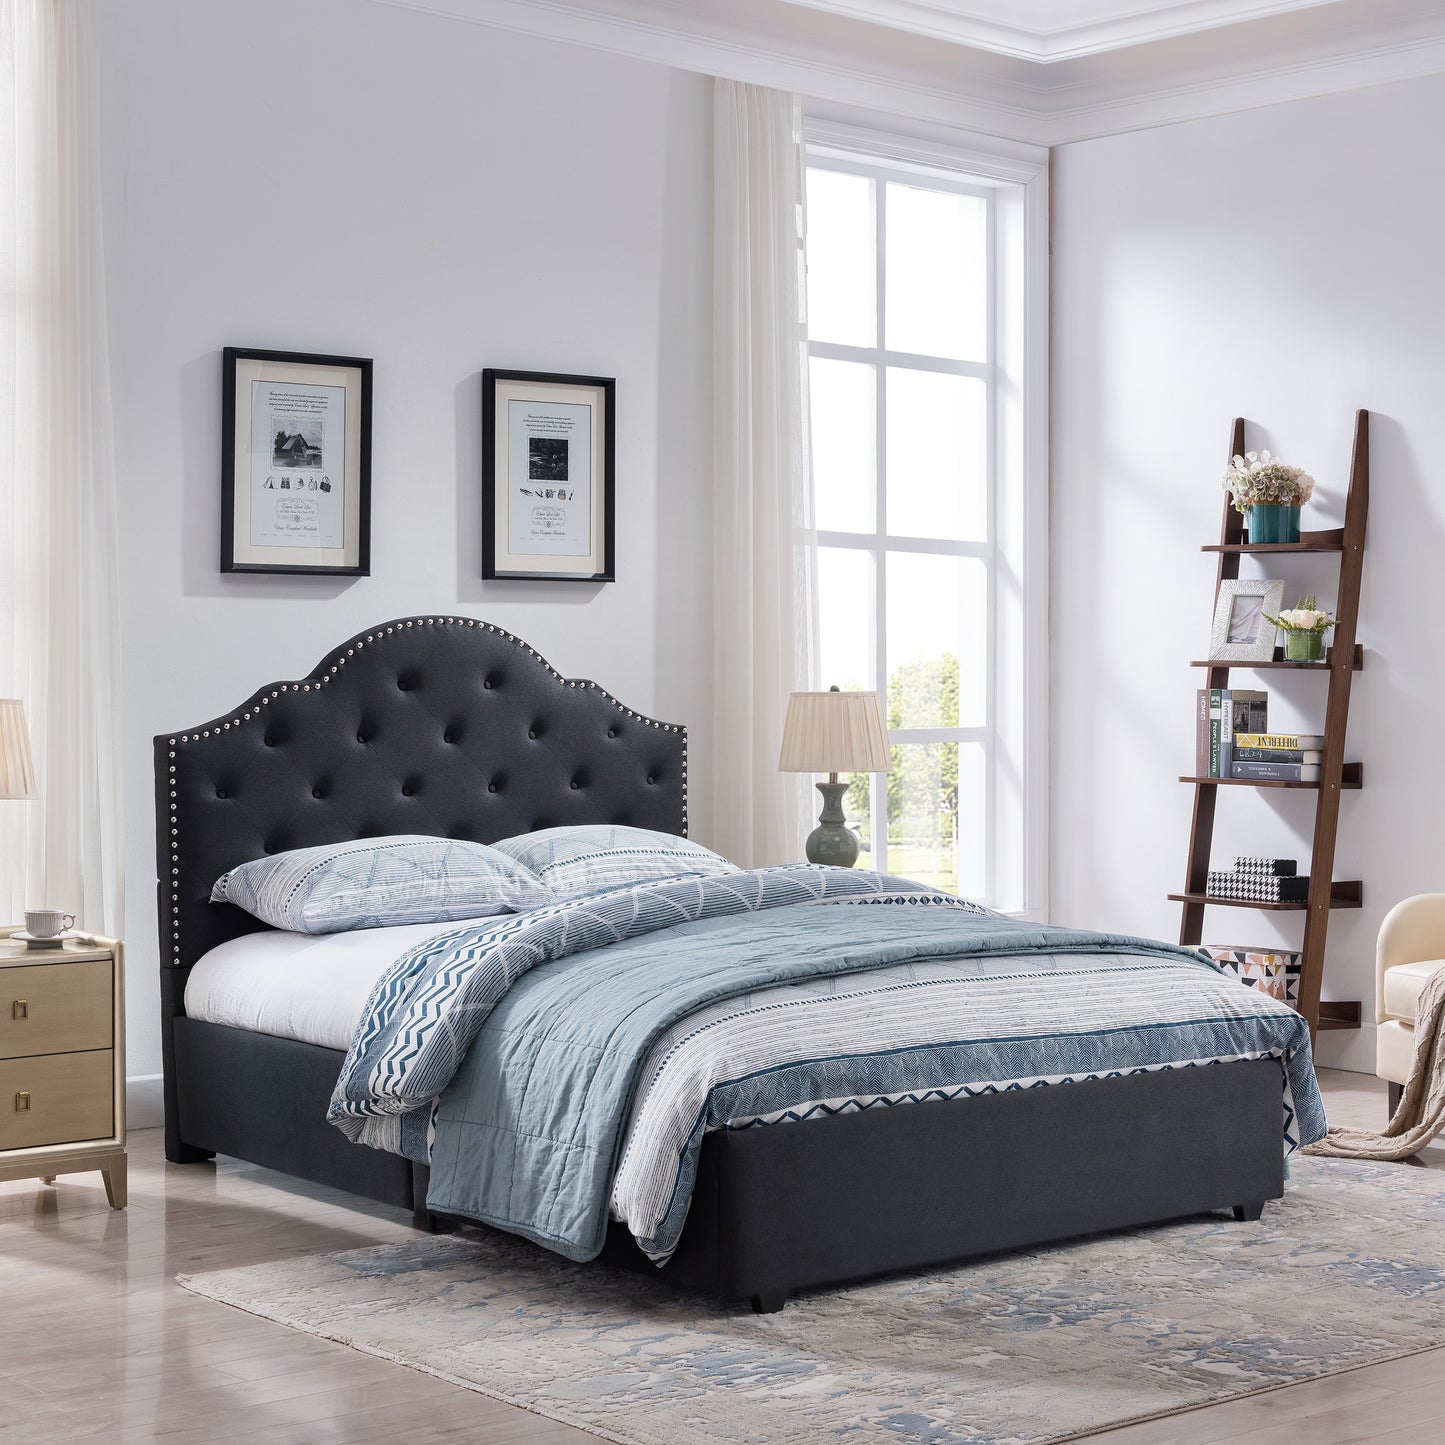 Gentry Contemporary Button-Tufted Camelback Queen Bed Frame with